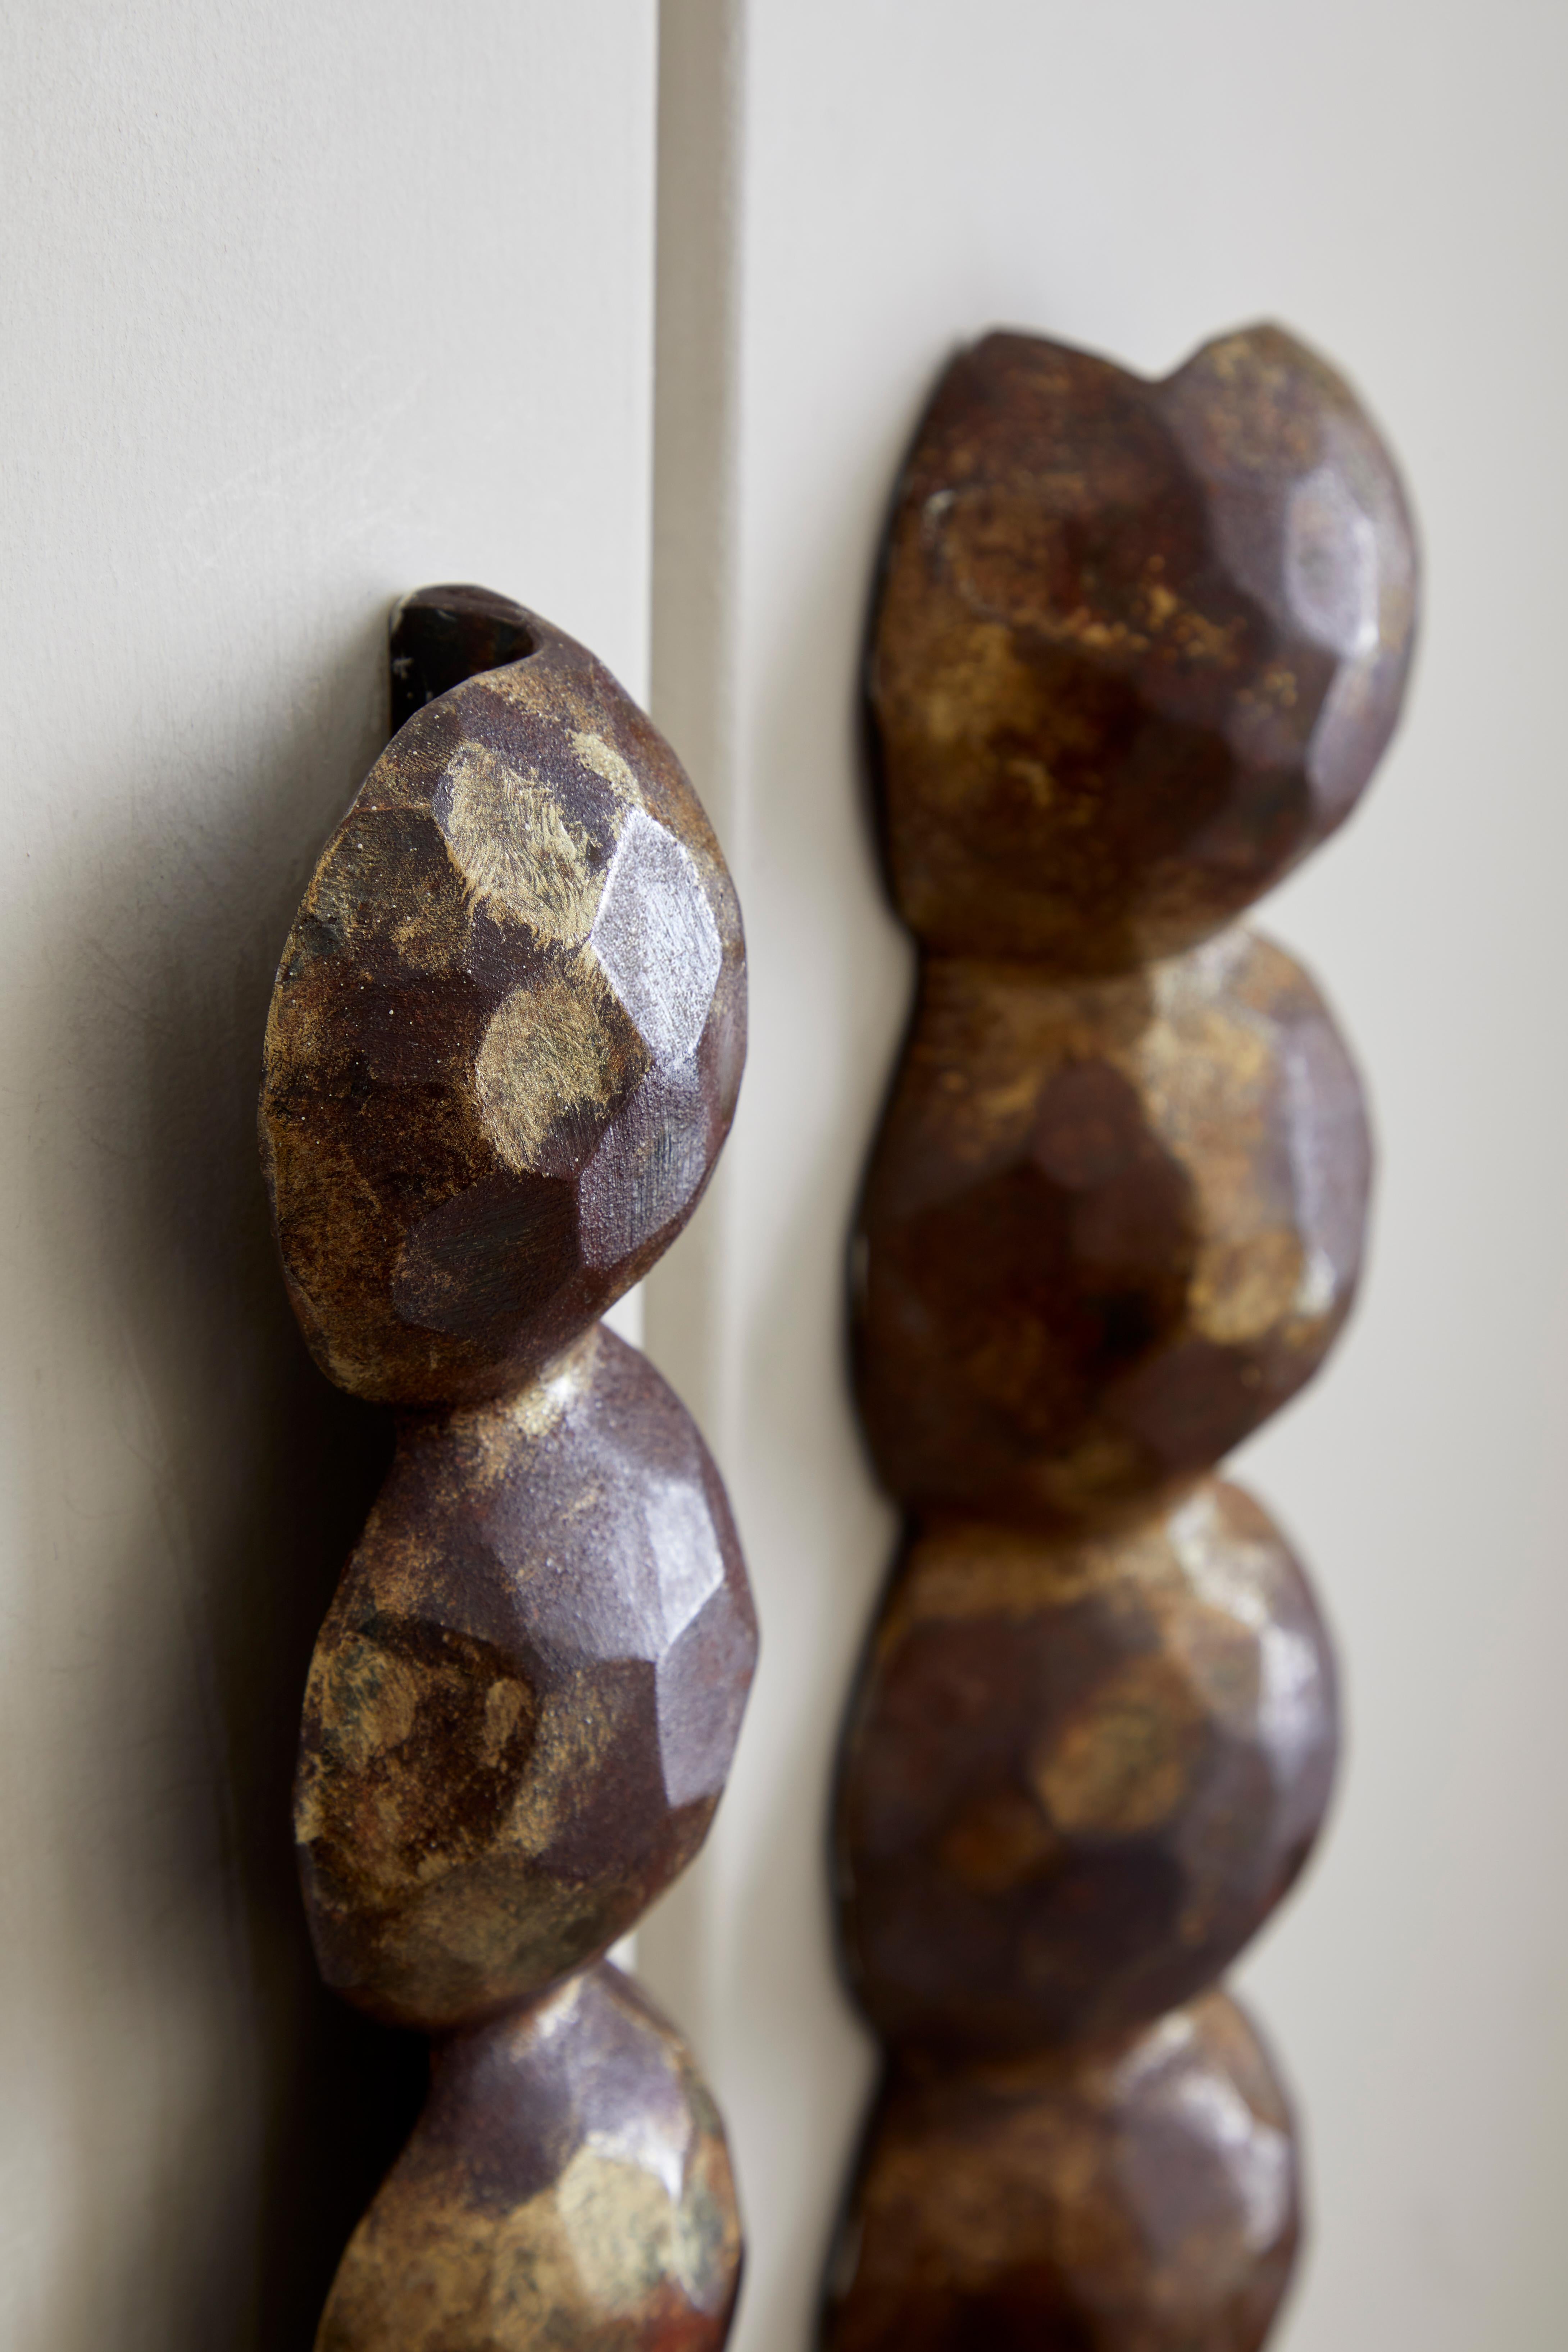 
Margit Wittig has used her sculptural skills to create beautifully-crafted, well-proportioned door handles, which are compositions of her unique signature pearl-shaped designs.

Each door pull begins as hand-sculpted spheres which are used to